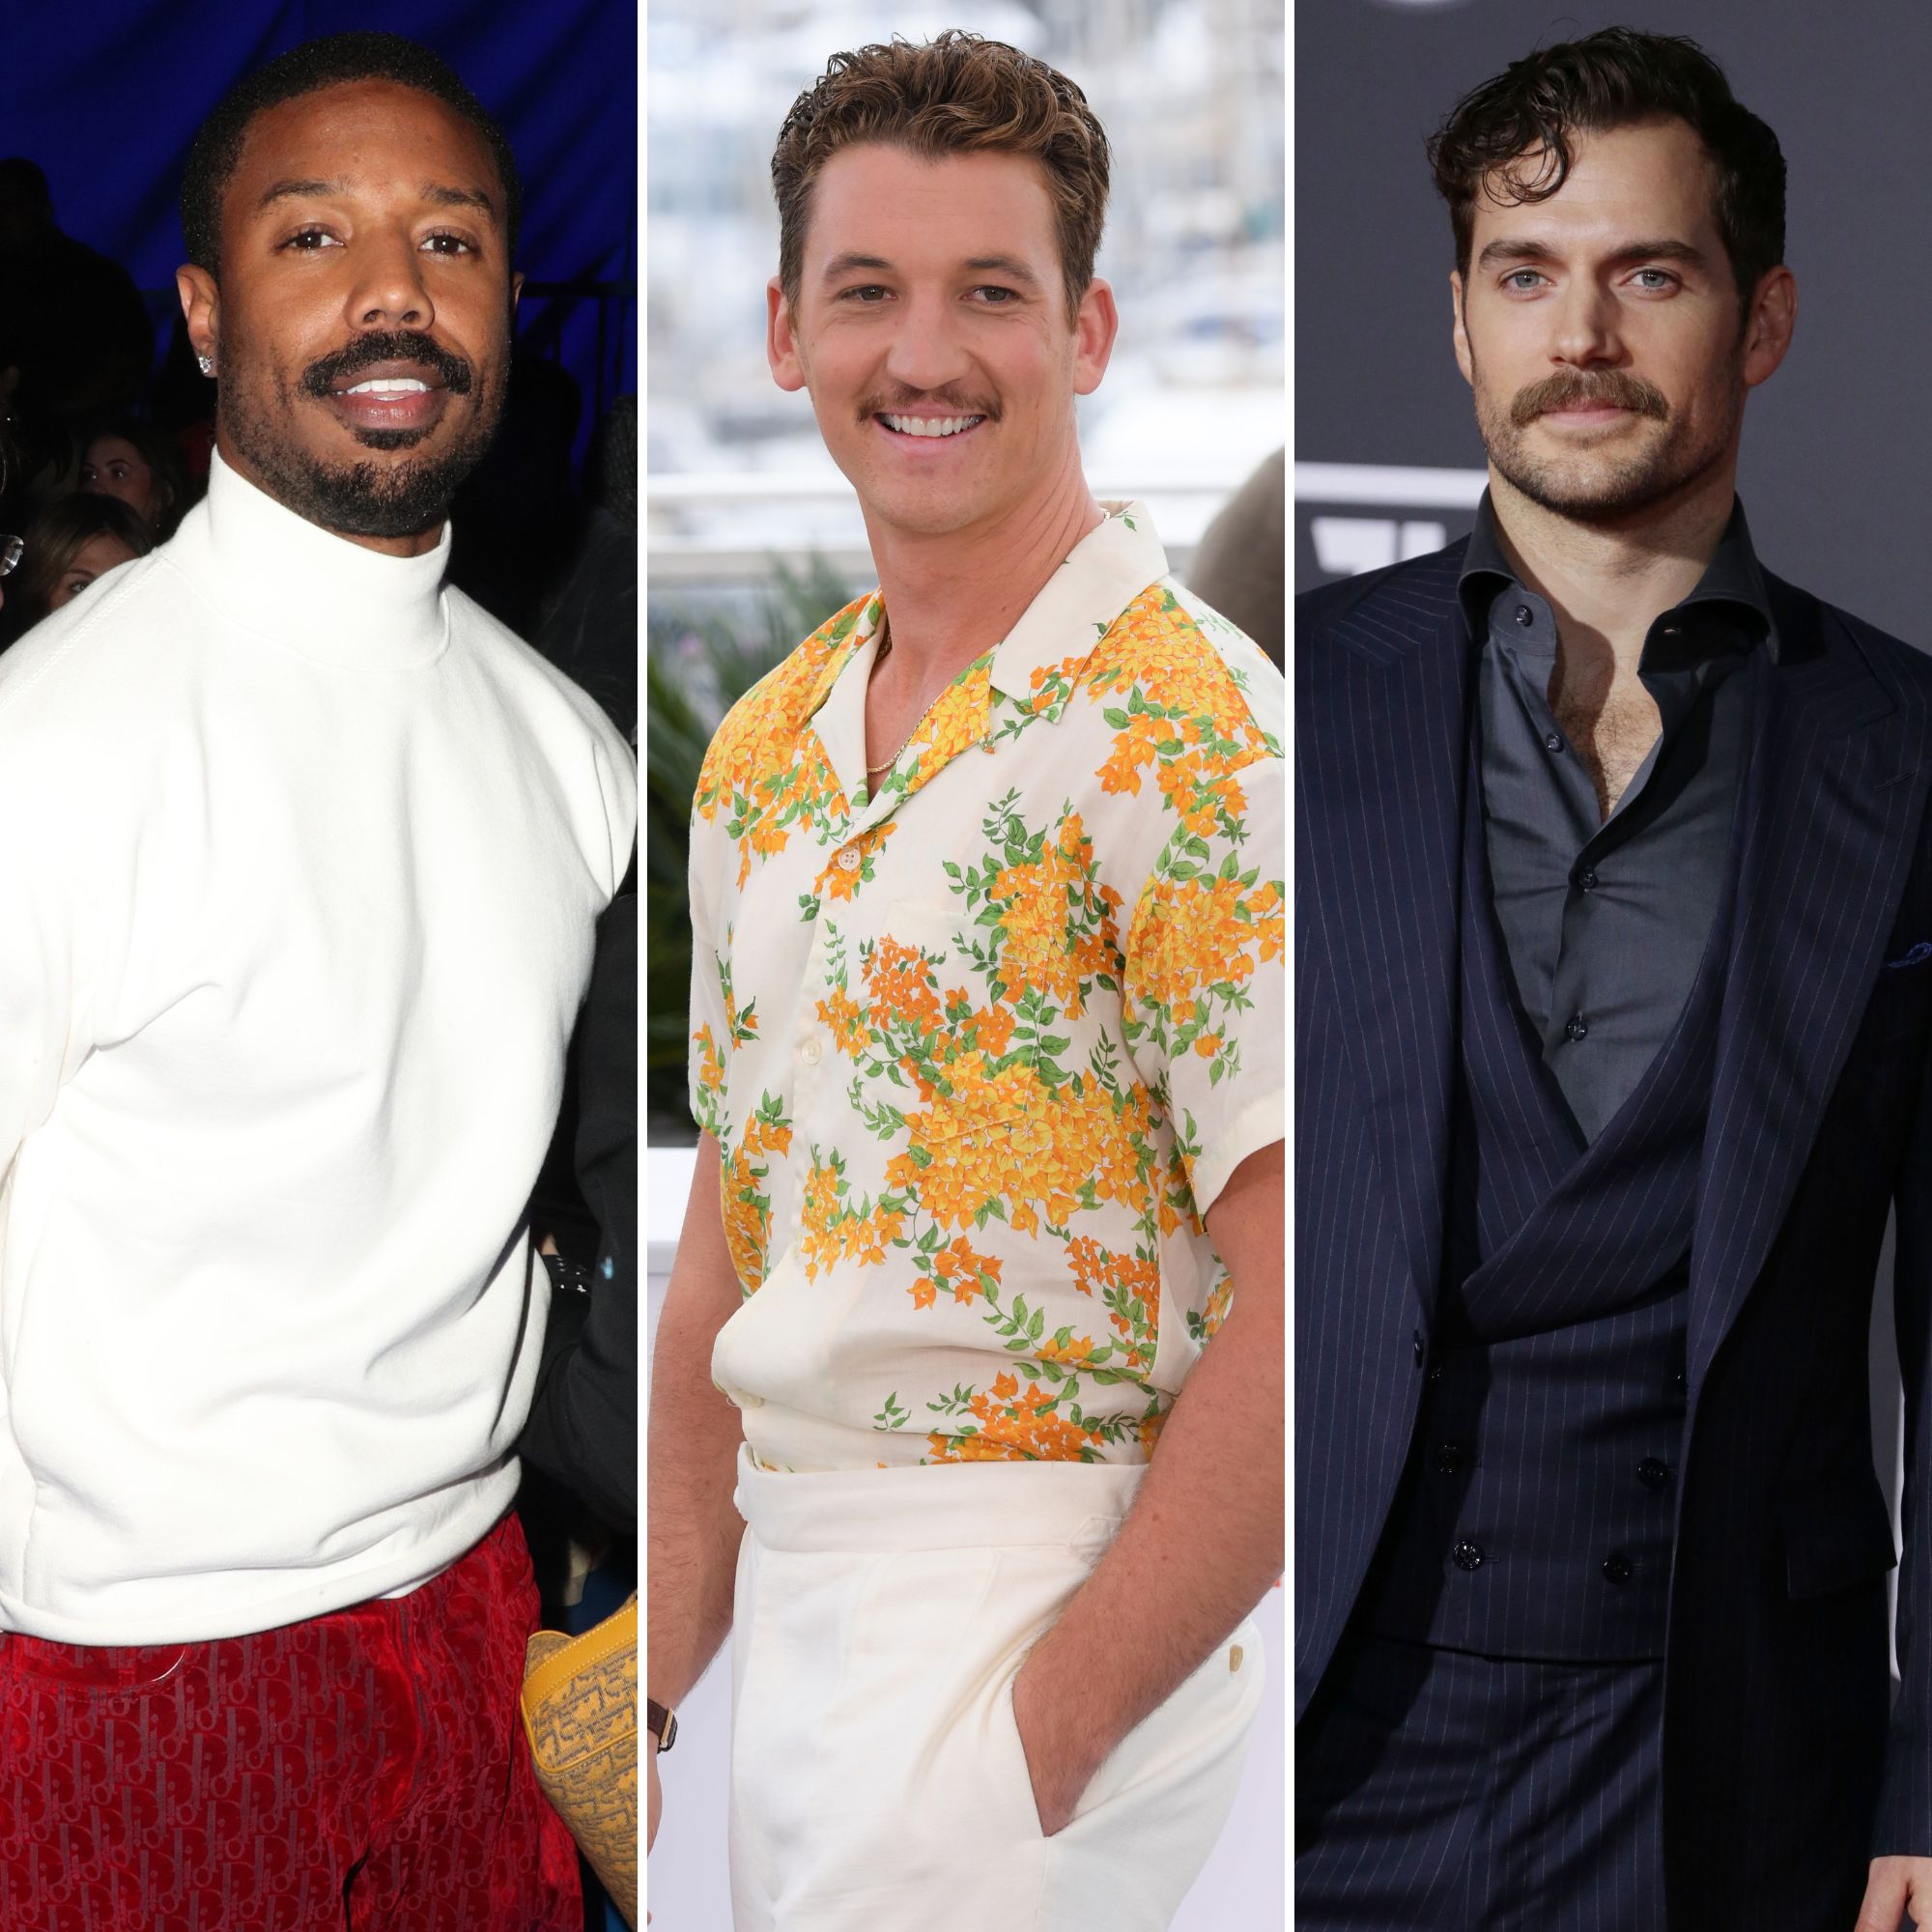 Celebrity Men With Mustaches: Photos of Stars' Facial Hair